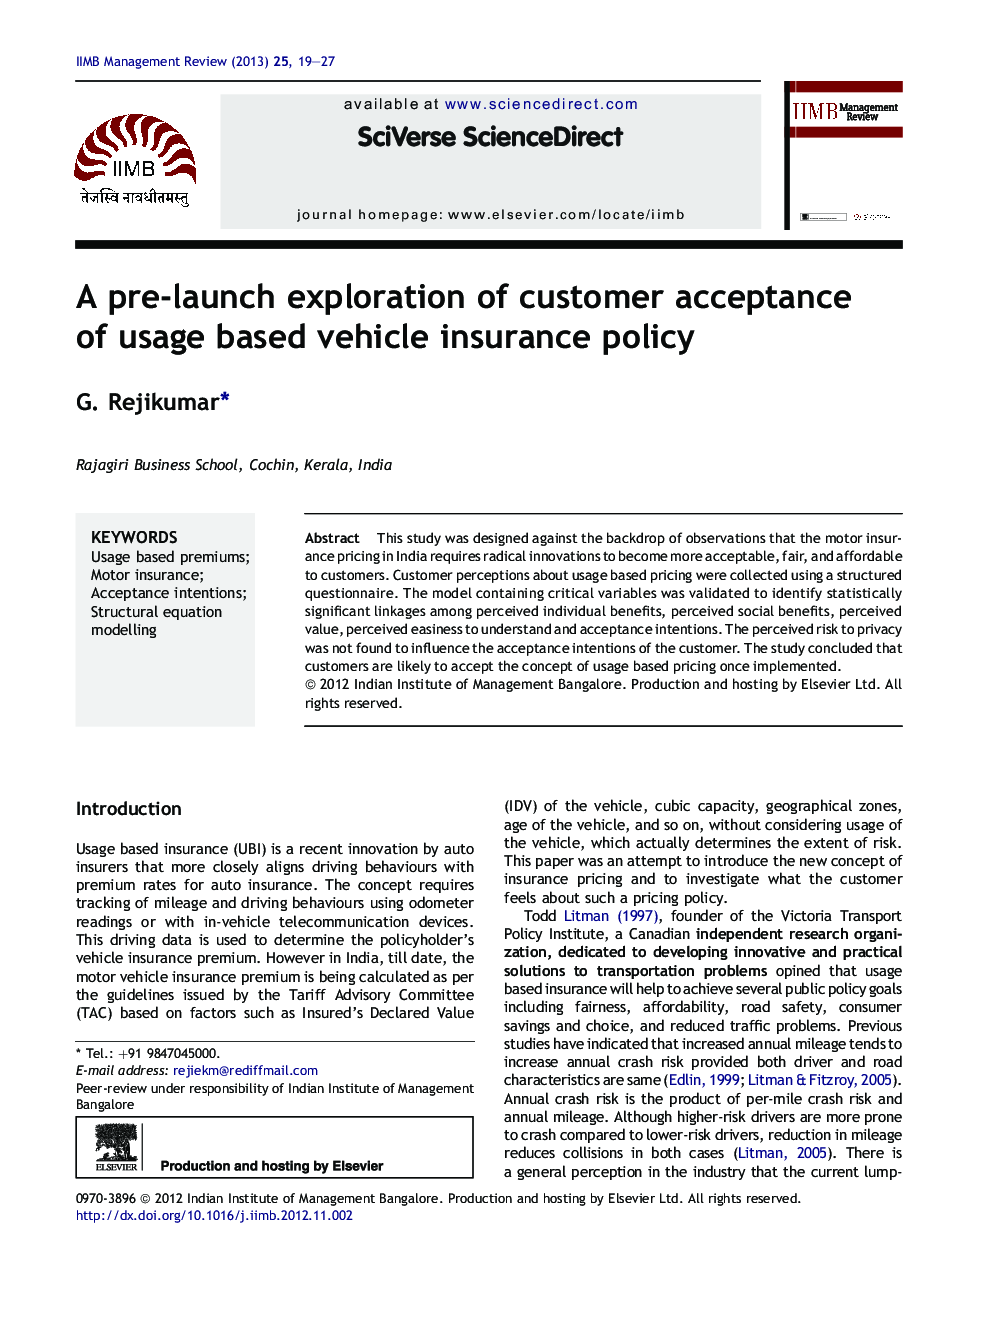 A pre-launch exploration of customer acceptance of usage based vehicle insurance policy 